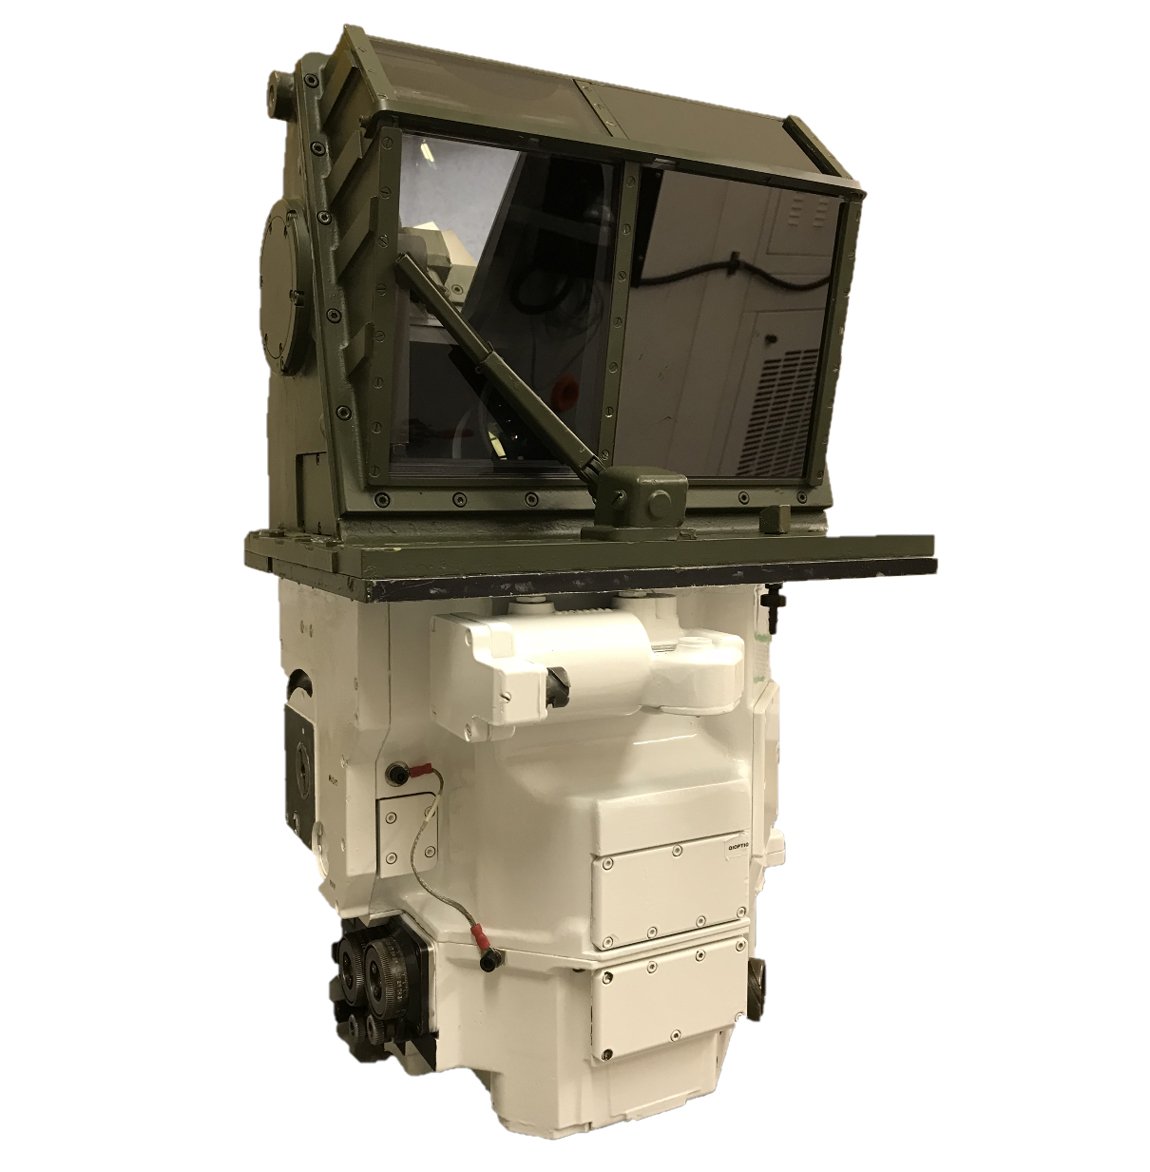 British Army Warrior Mechanized Combat Vehicle employs the Thermal Raven Sight from Excelitas